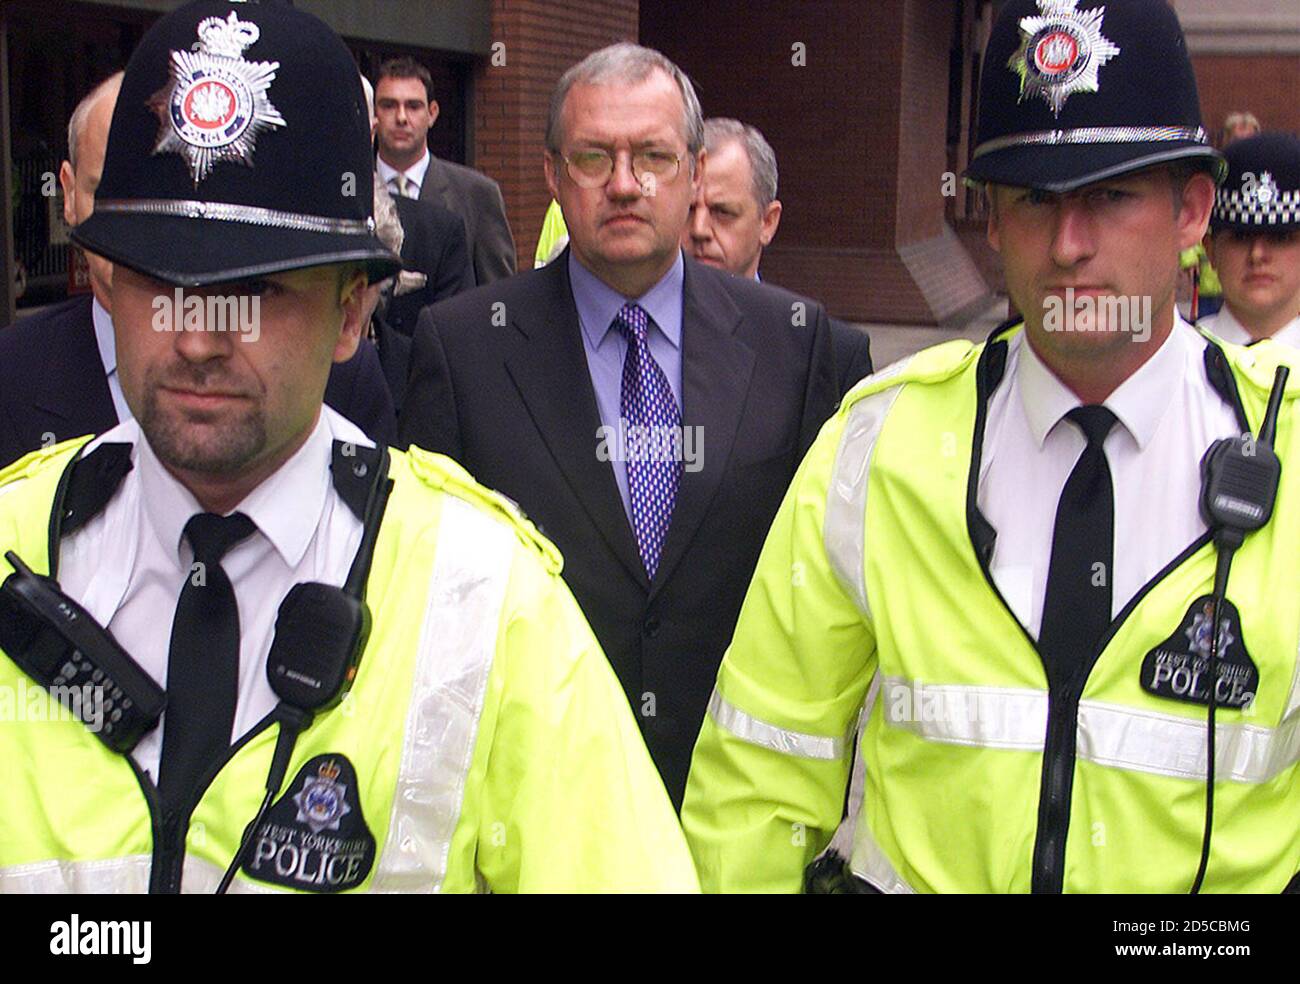 Former South Yorkshire Police Chief Superintendent David Duckinfield leaves court under police escort after the jury failed to reach a verdict at Leeds Crown Court July 24, 2000. Former Chief Superintendant David Duckinfield was charged with manslaughter and wilful neglect of duty in the first criminal proceedings to follow the Hillsborough tragedy in which 96 Liverpool soccer fans were crushed to death at the 1989 FA Cup Semi final.  DC/JDP Stock Photo